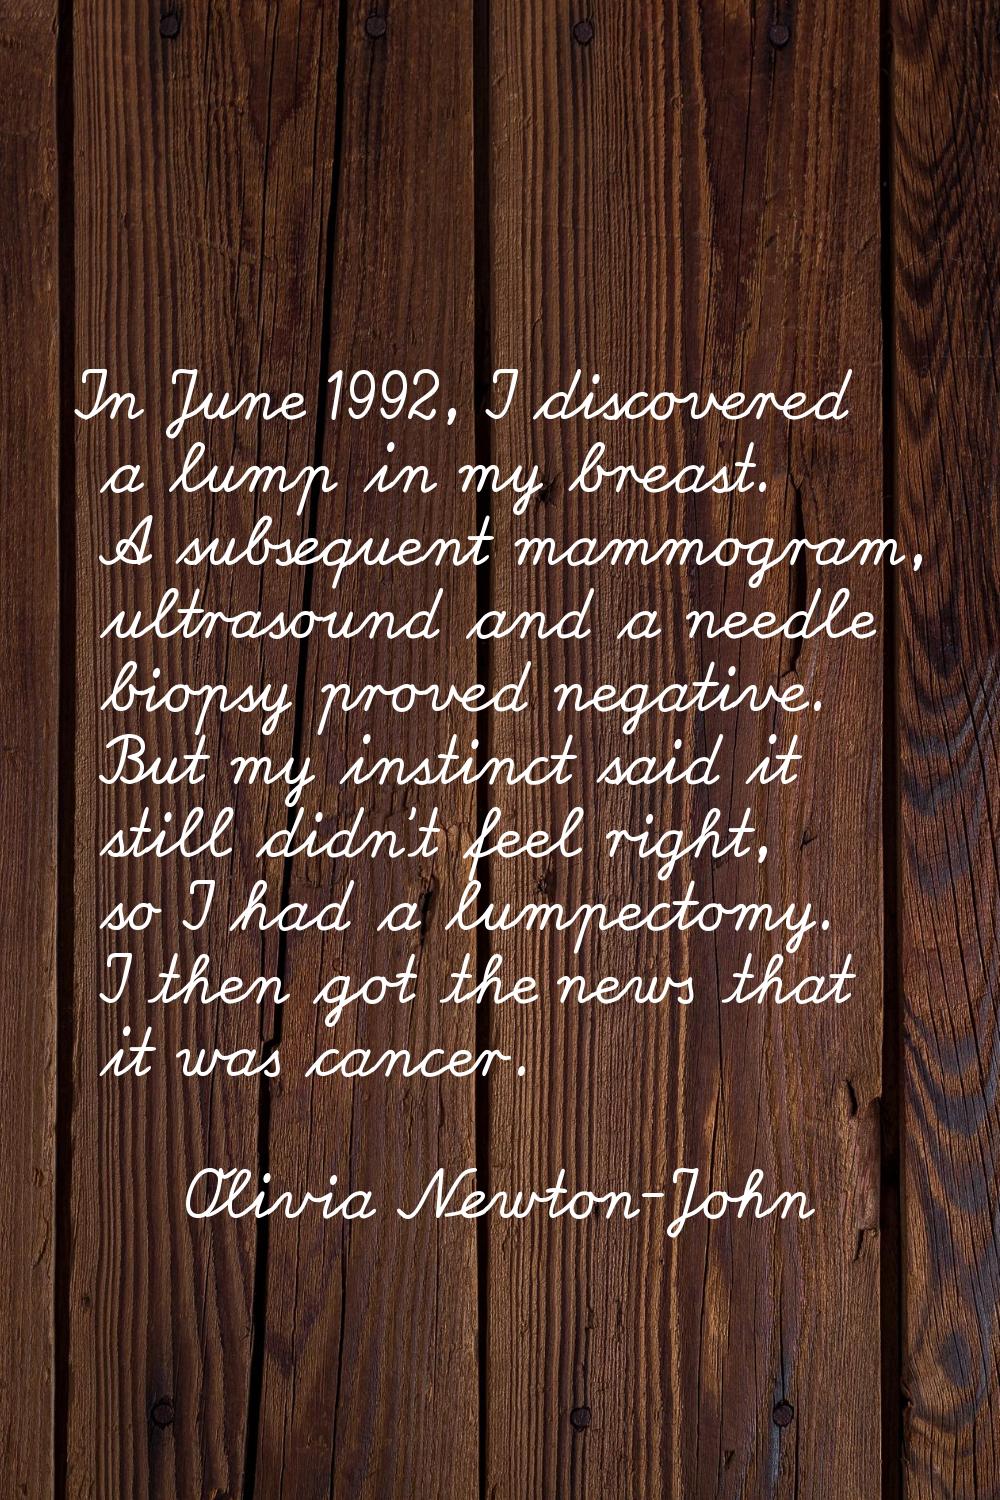 In June 1992, I discovered a lump in my breast. A subsequent mammogram, ultrasound and a needle bio